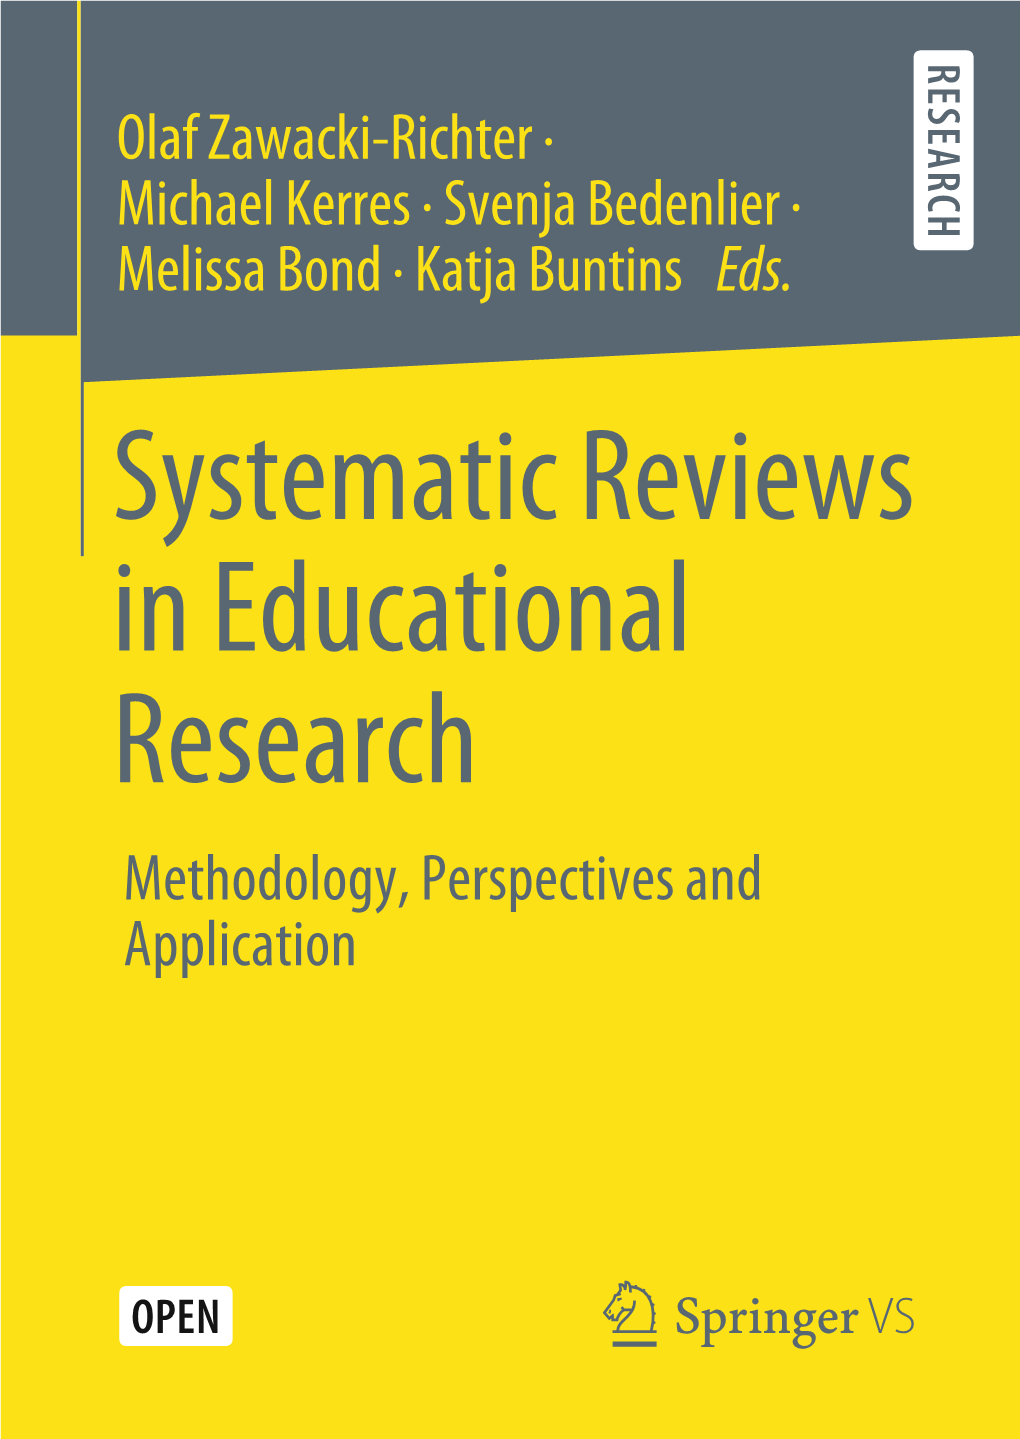 Systematic Reviews in Educational Research